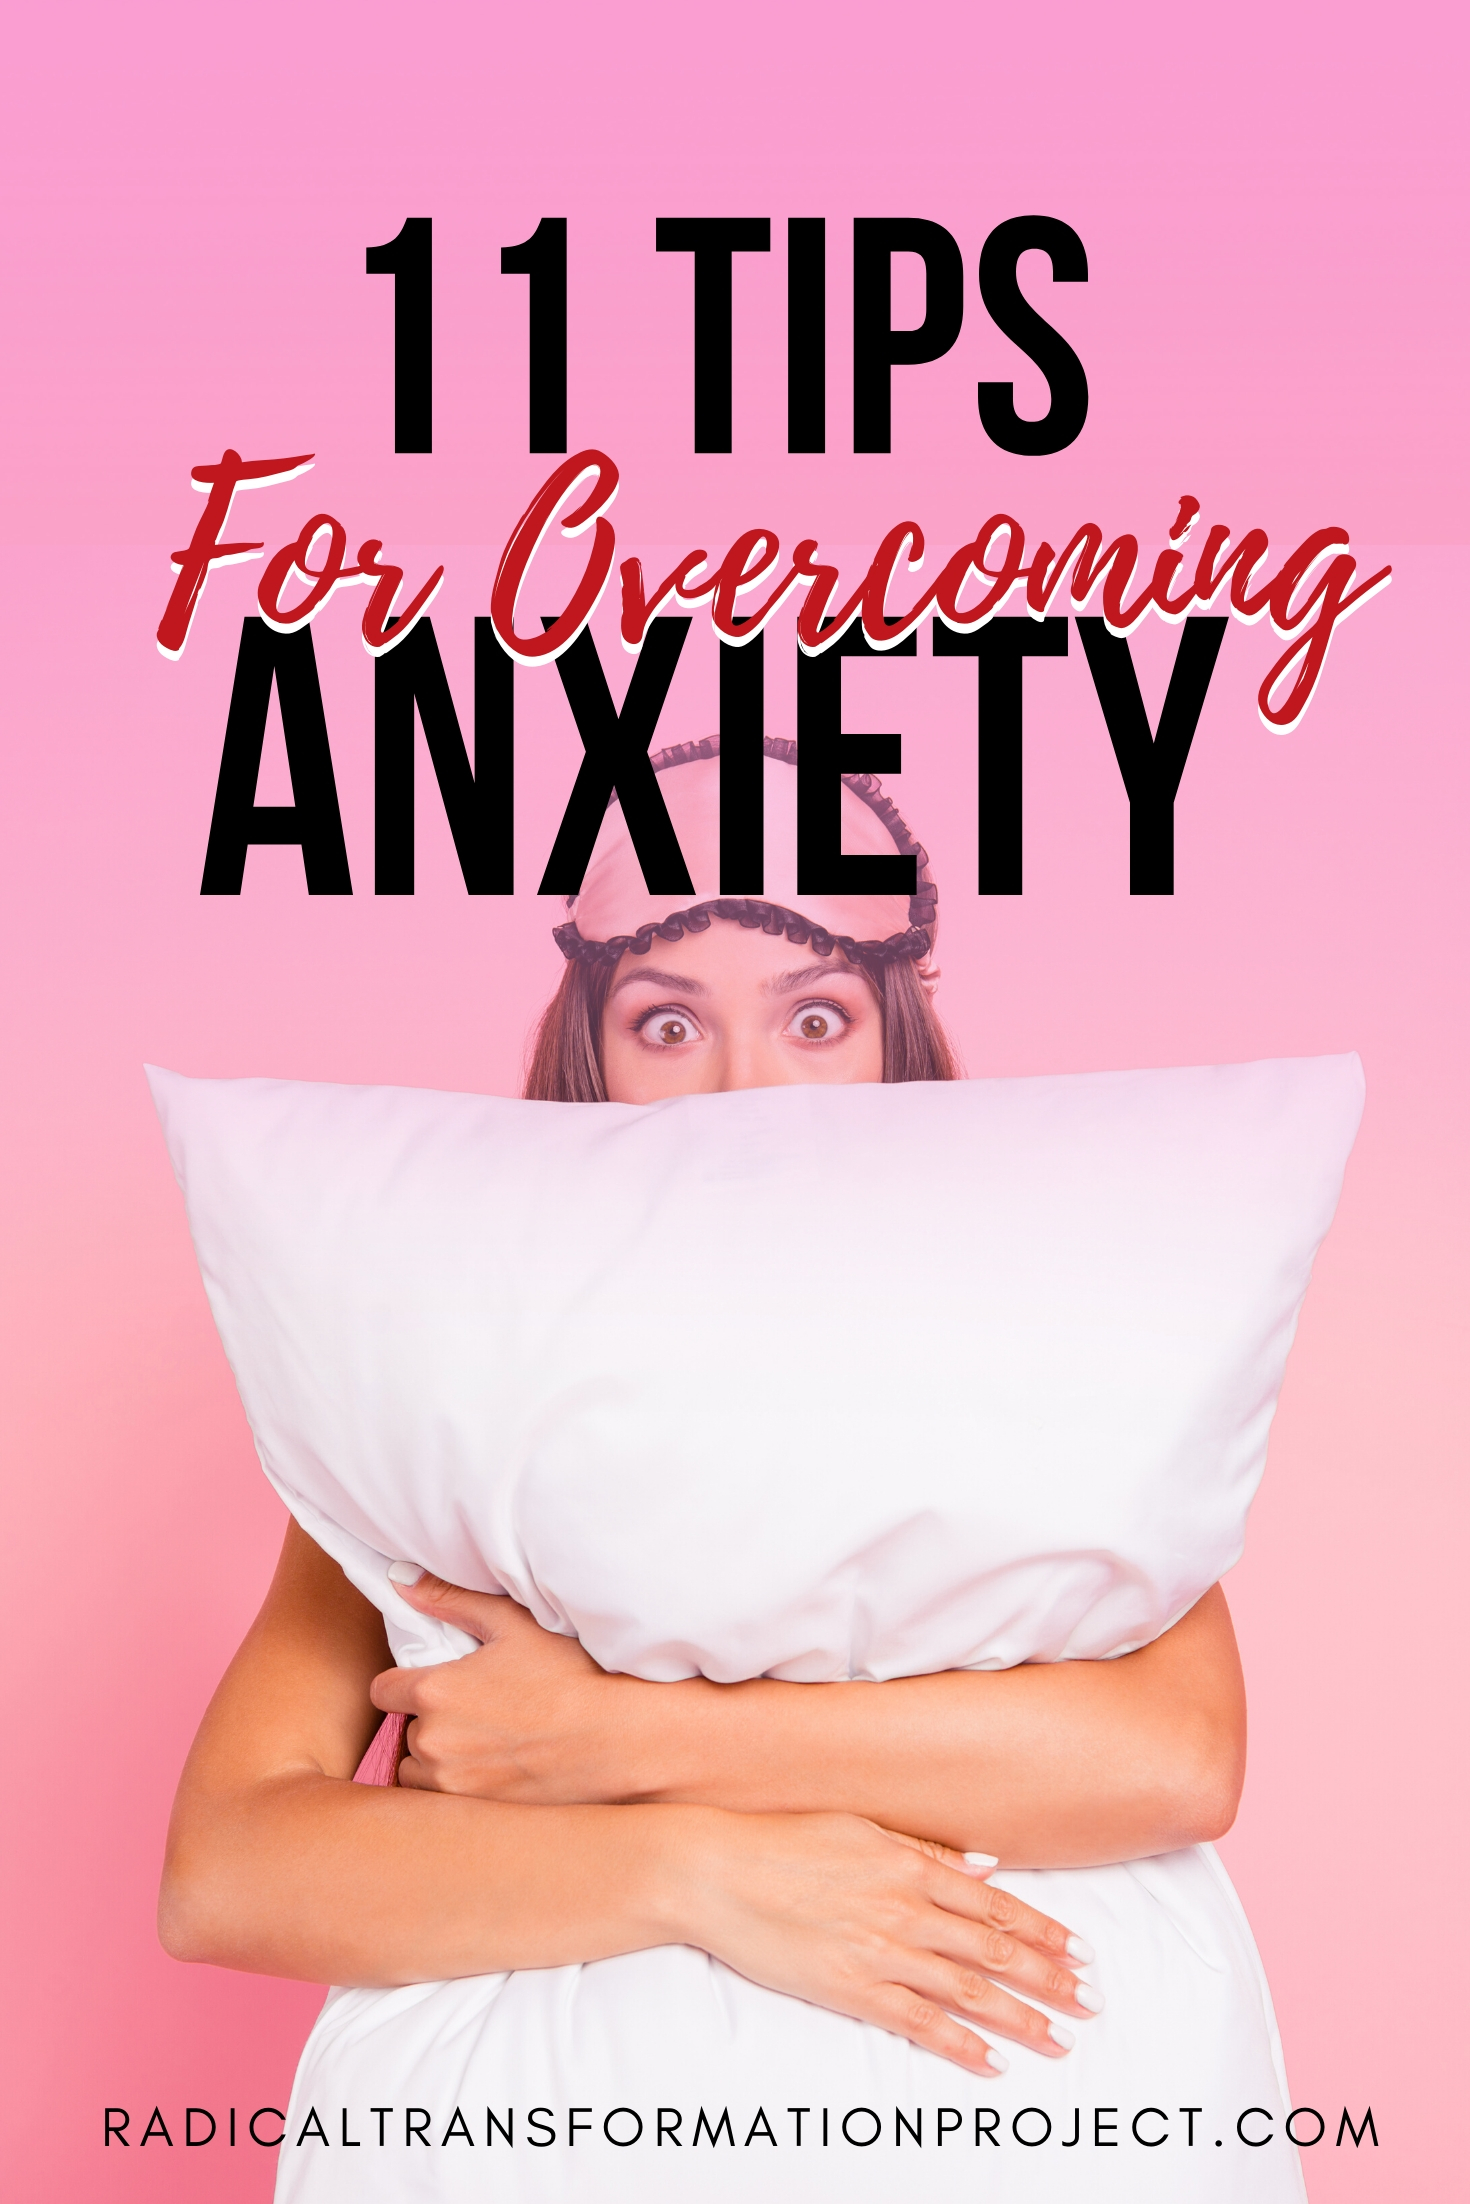 11 tips for overcoming anxiety